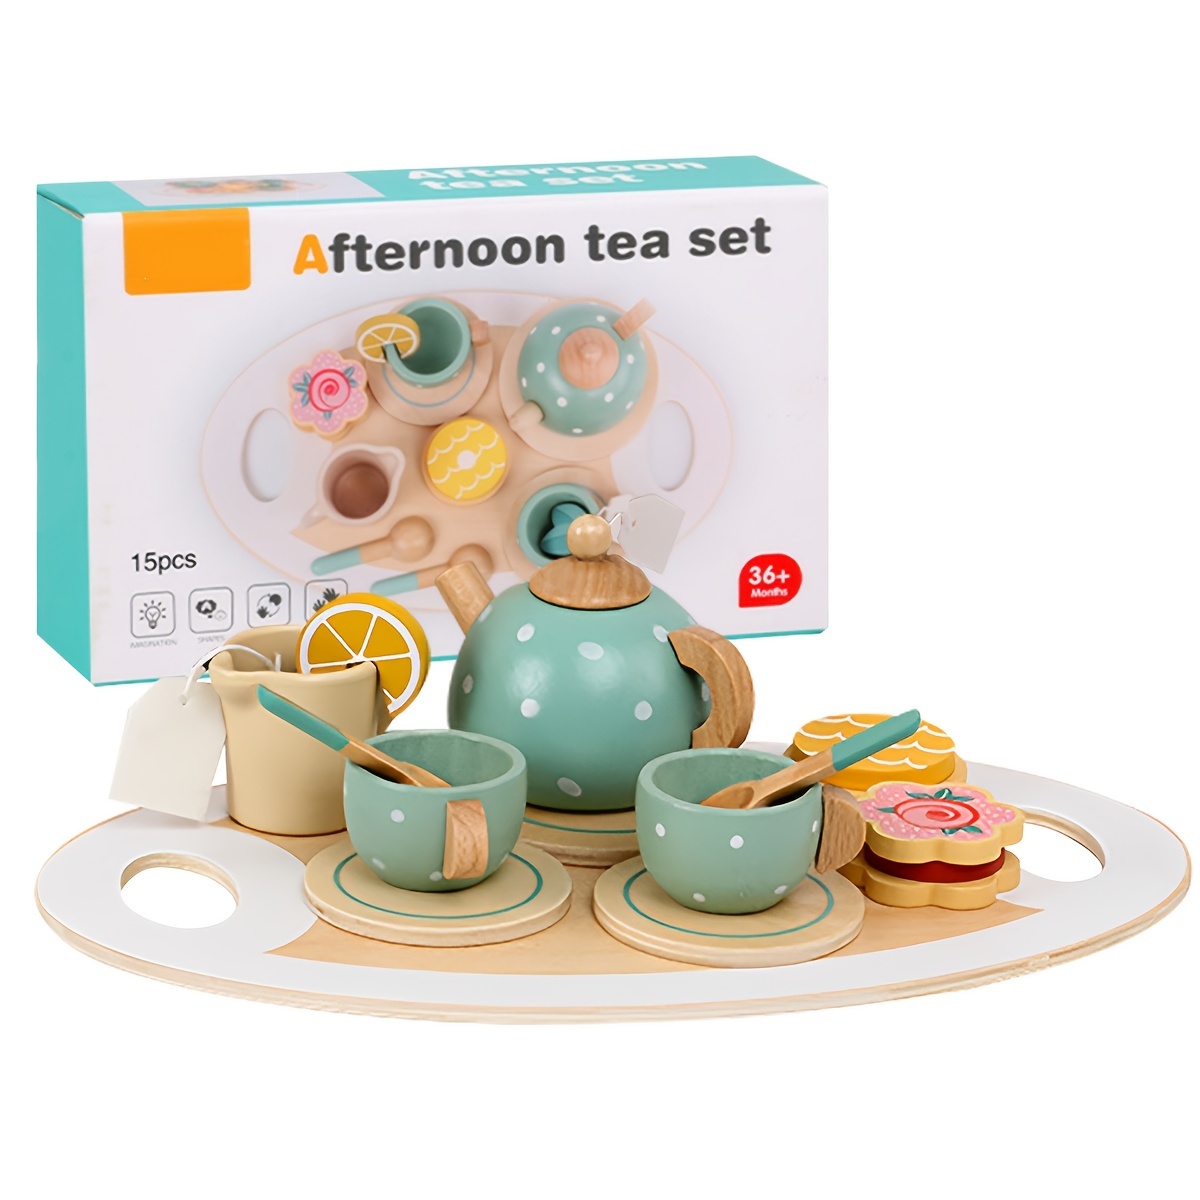  BUYGER Wooden Tea Party Set for Little Girls, Kids Wooden  Kitchen Sets Play Food Accessories with Teapot Tea Cup Dessert Toys Tea Set  Pretend Play Gifts for Kids Girls Toddler 3-5